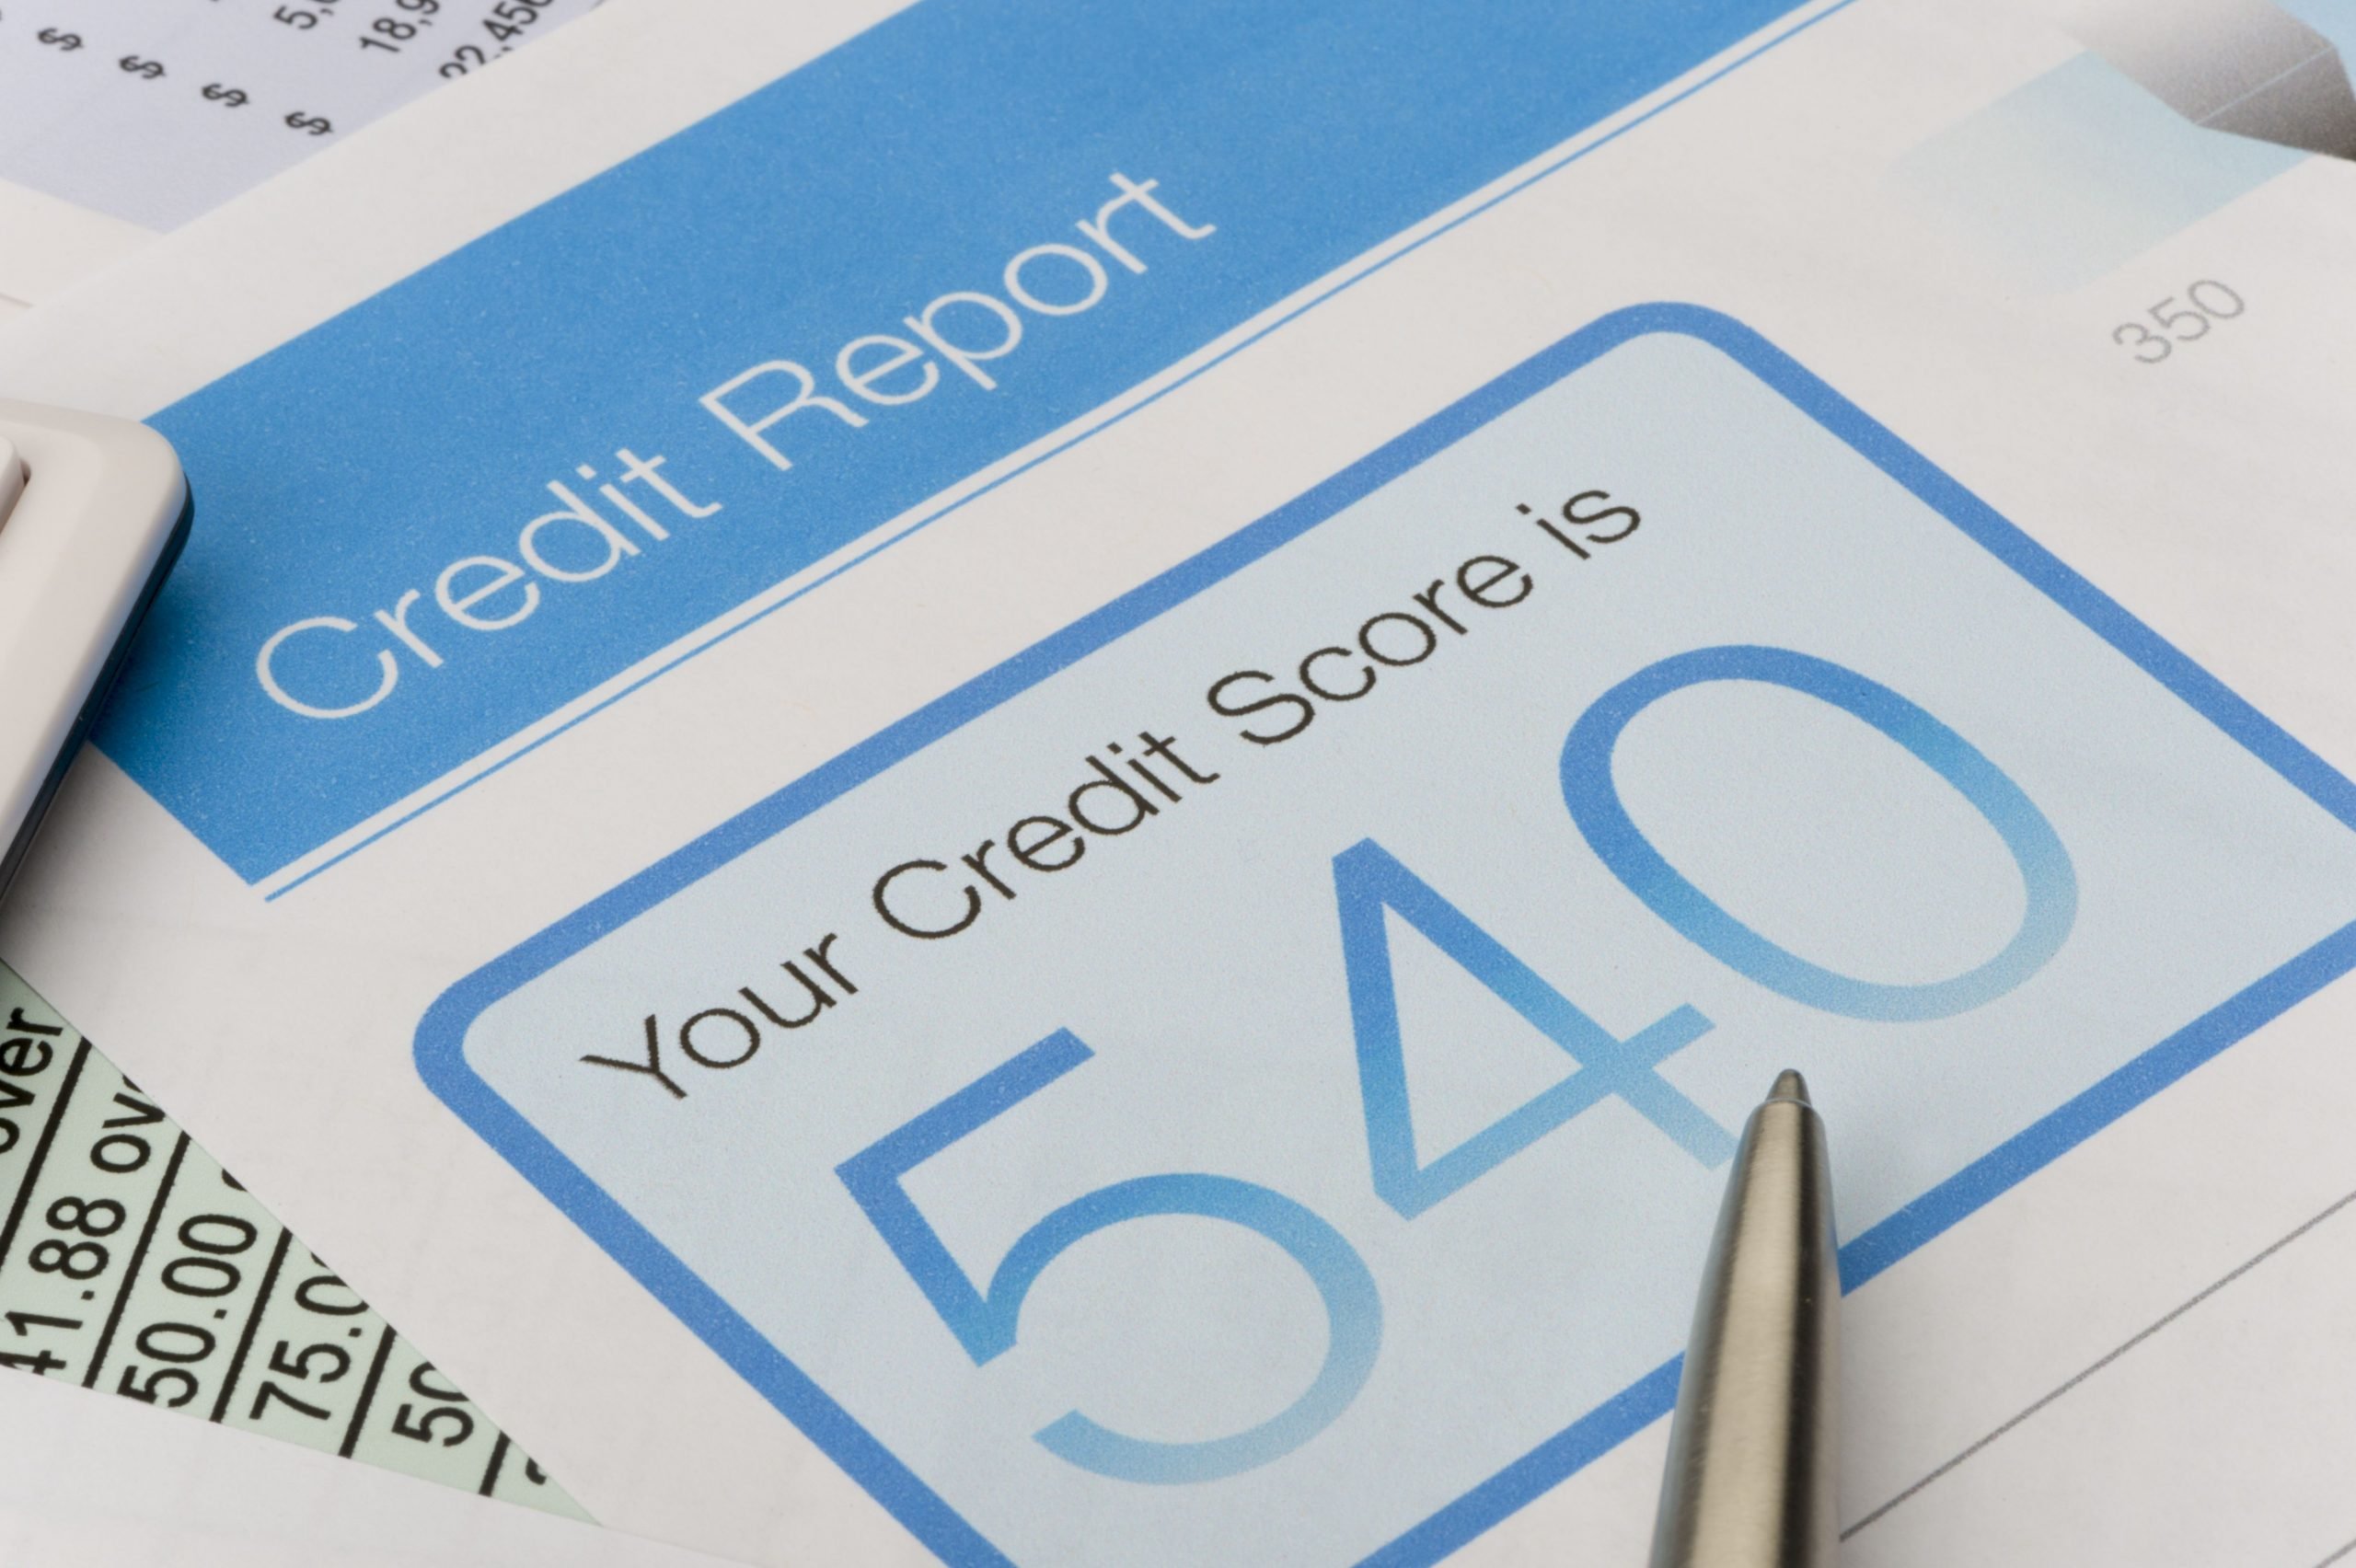 Can You Legally Buy Better Credit?